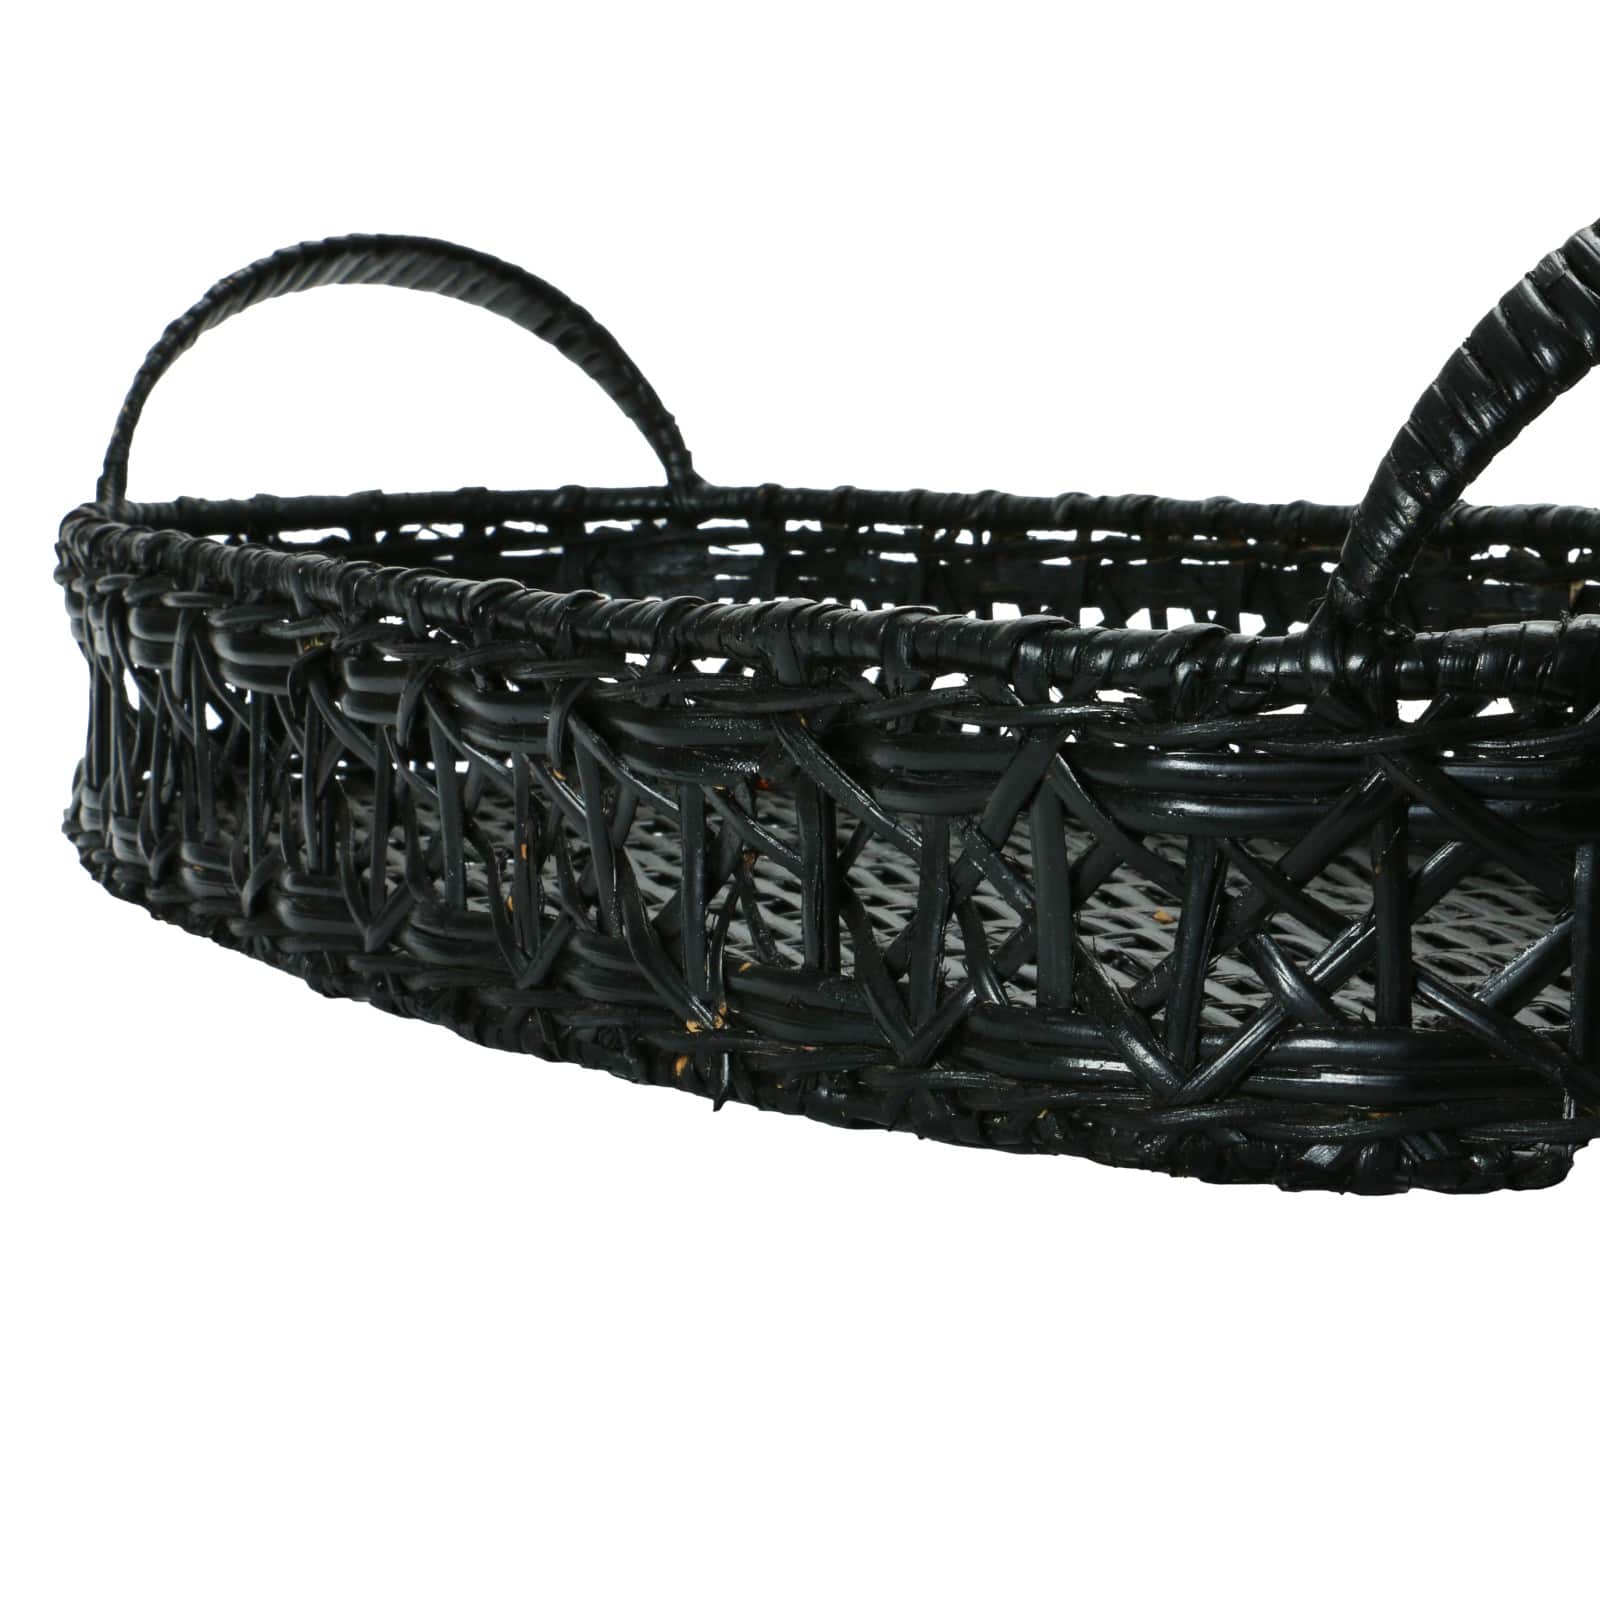 2.5ft. Black Hand-Woven Rattan Tray with Handles